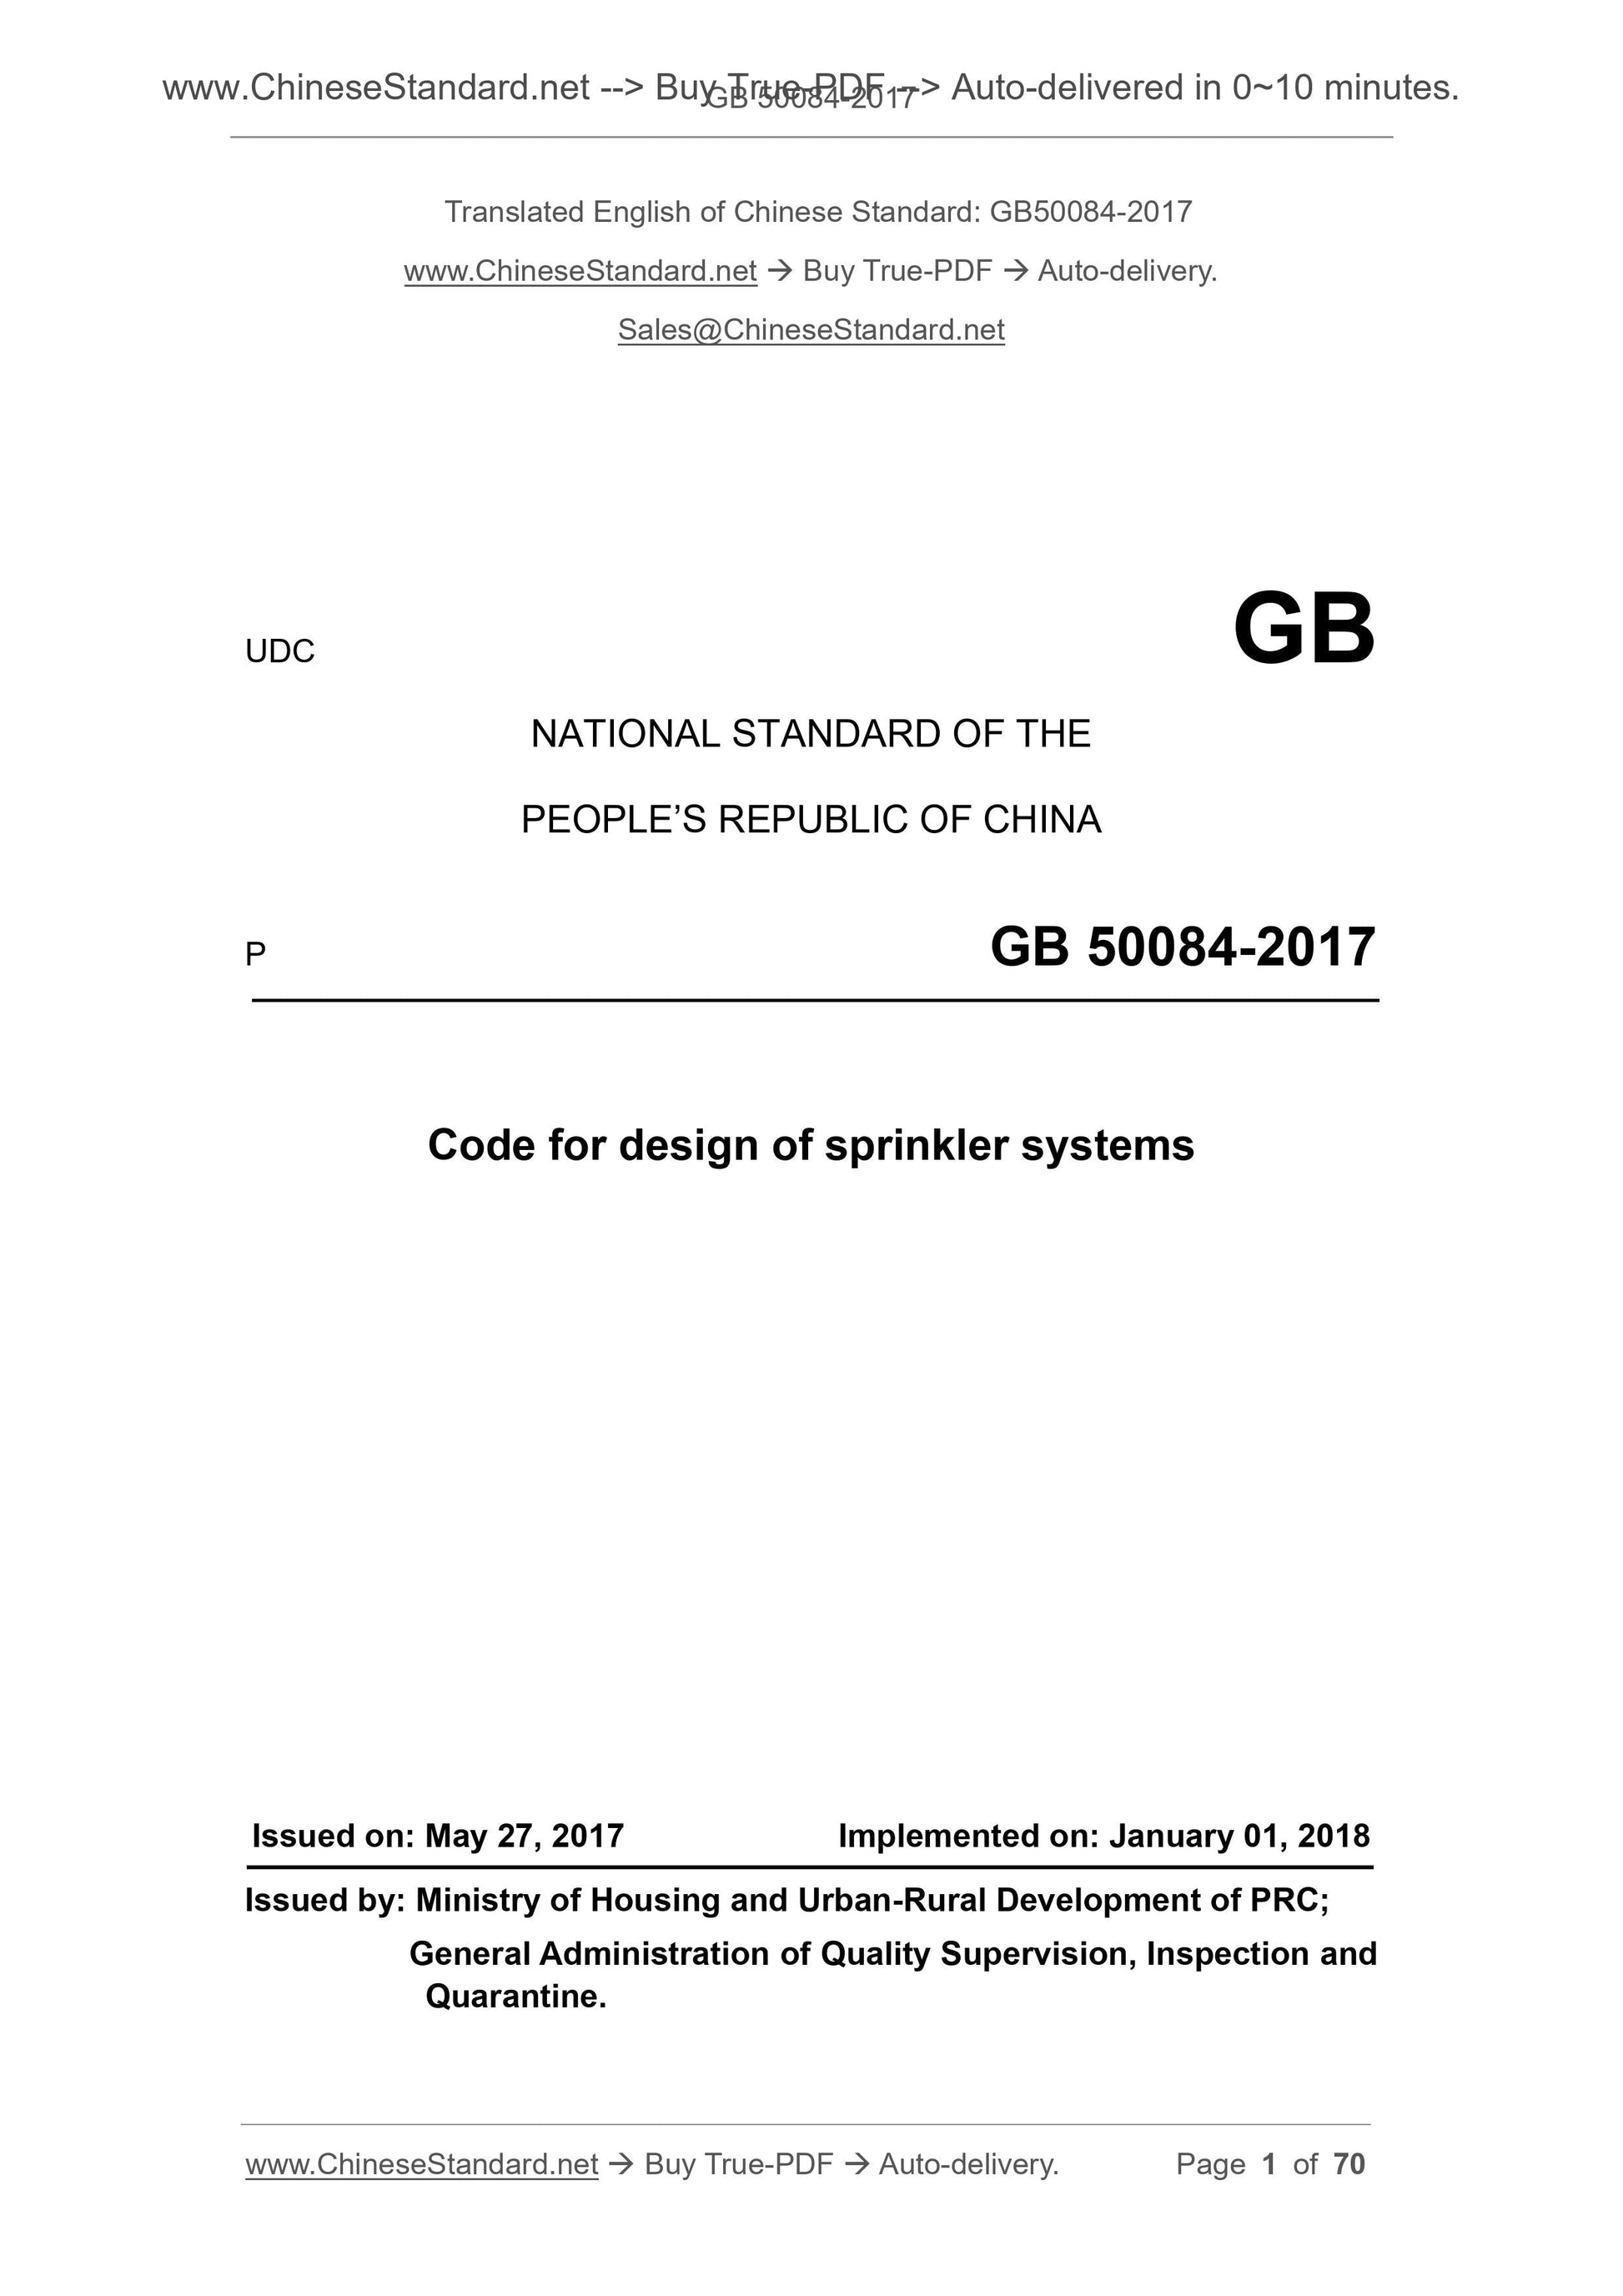 GB 50084-2017 Page 1